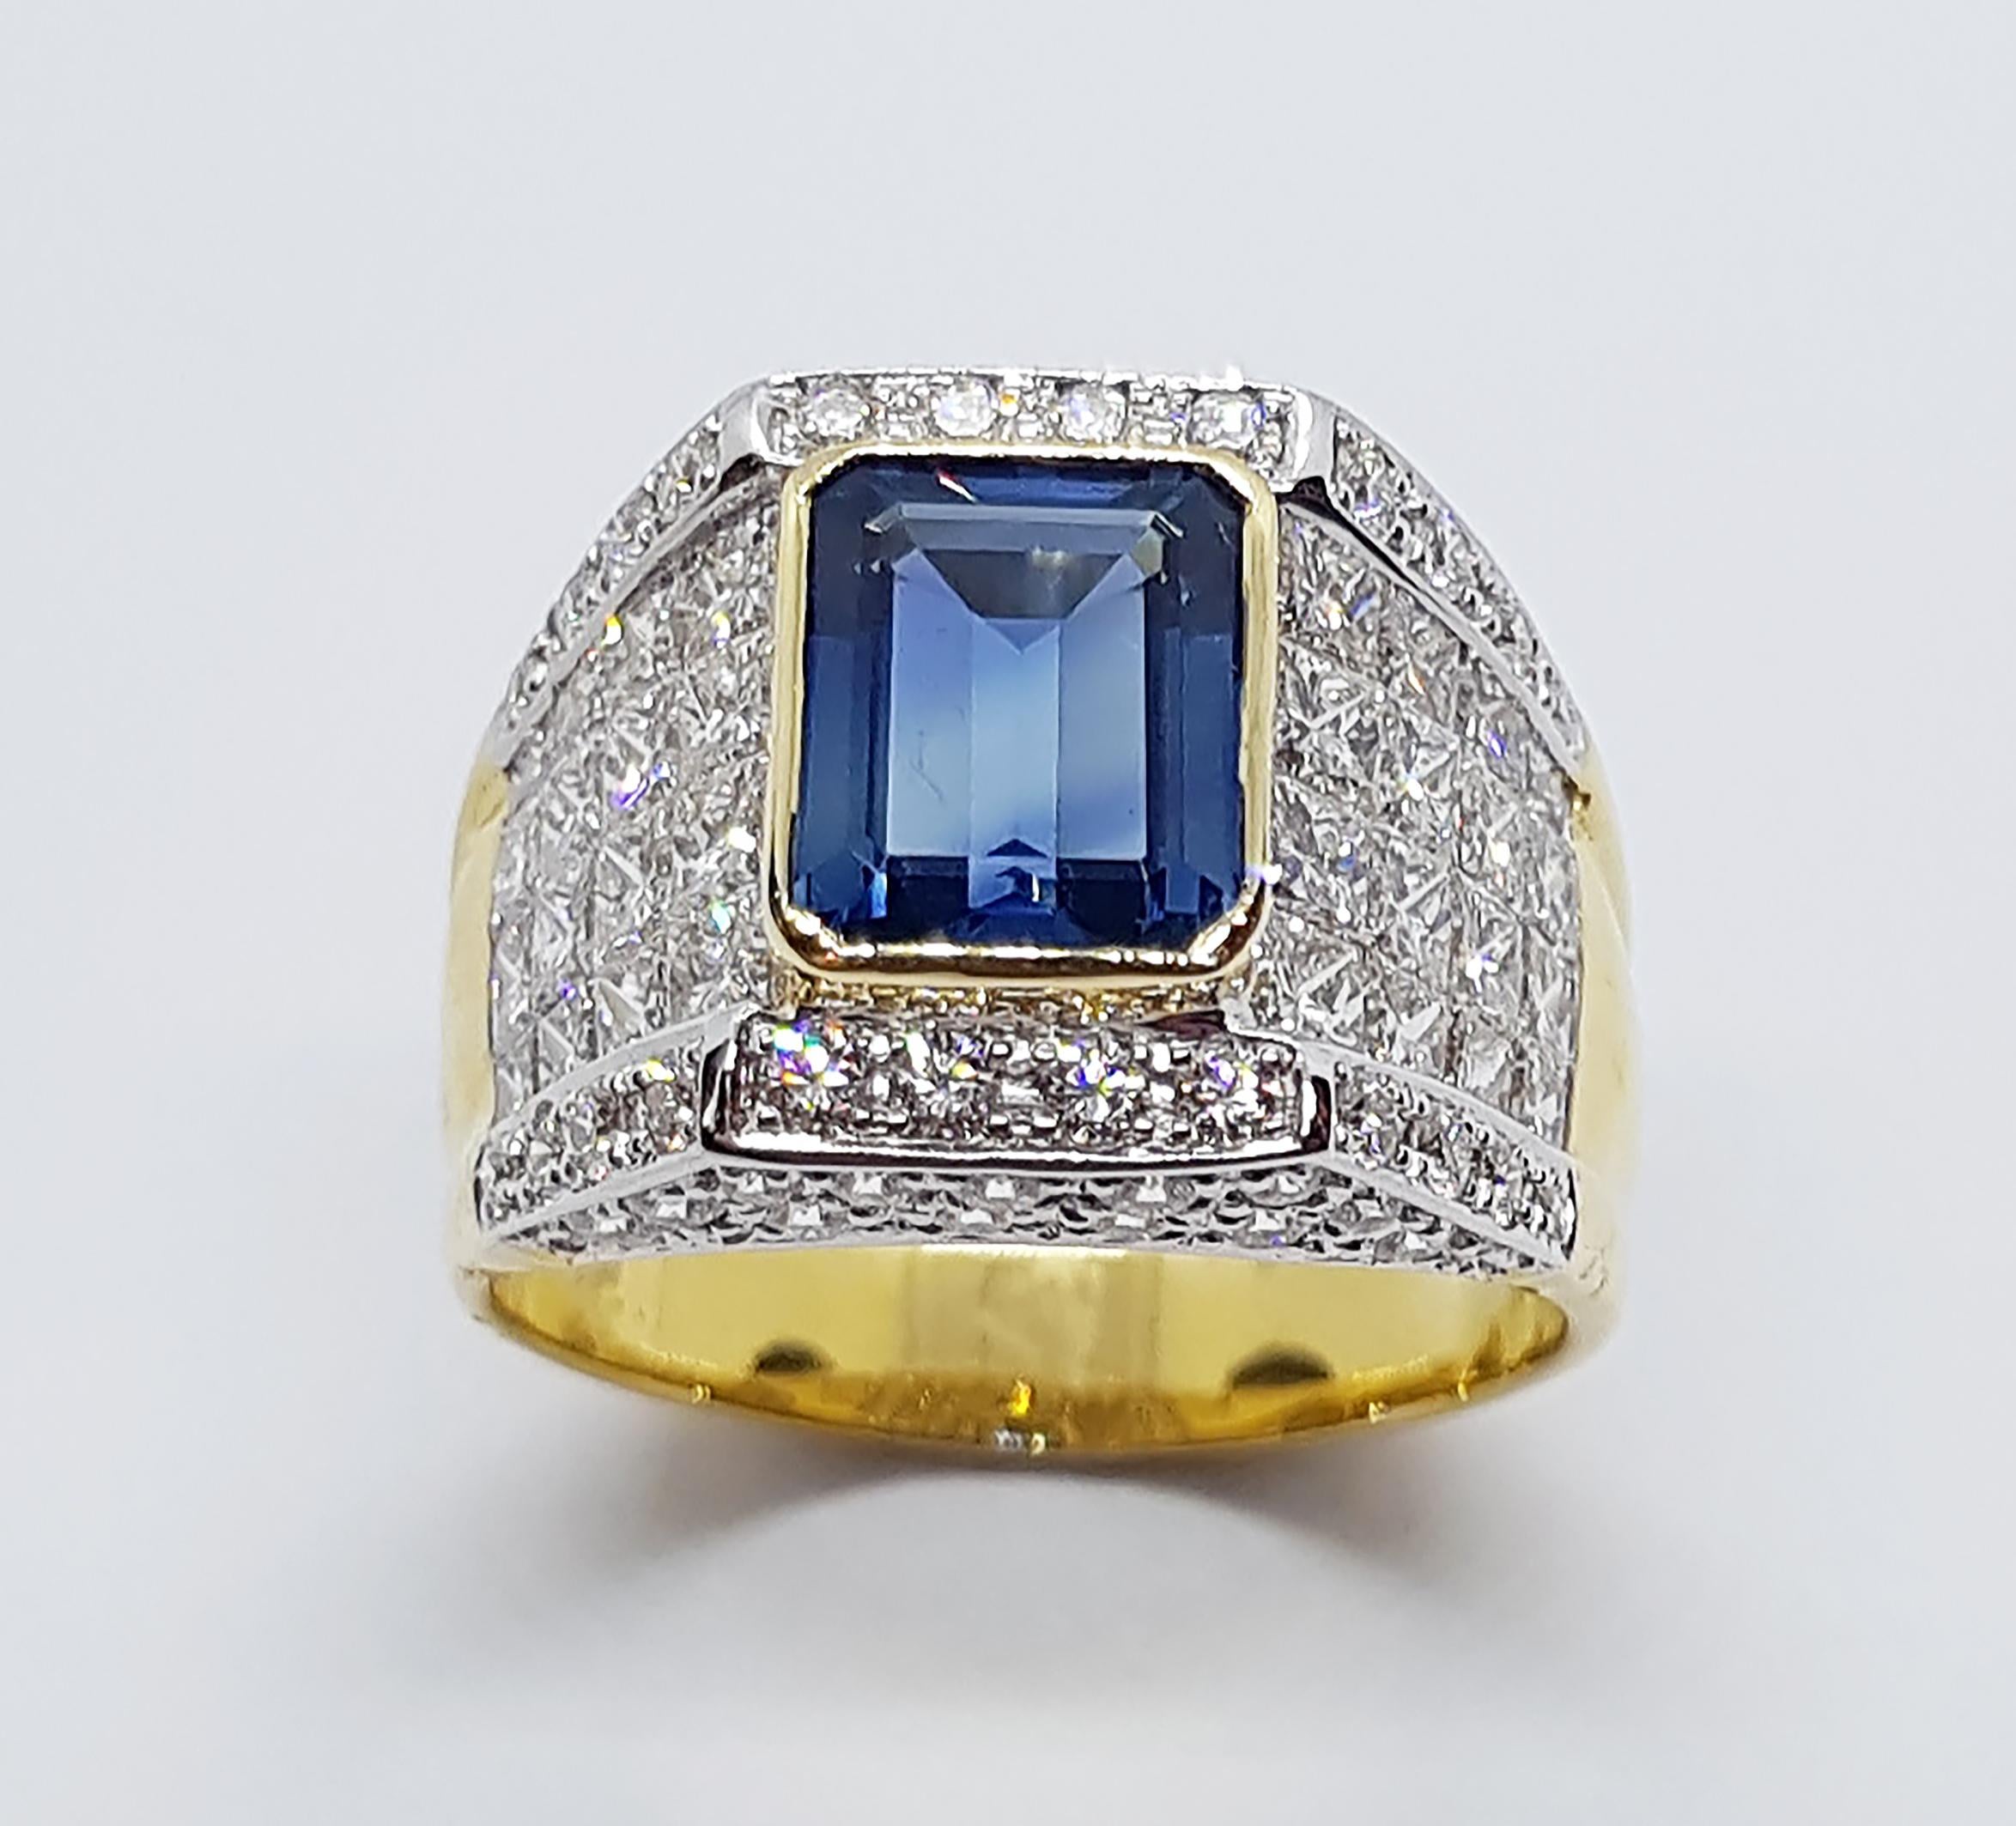 Blue Sapphire 2.42 carats with Diamond 2.39 carats Ring set in 18 Karat Gold Settings

Width:  0.7 cm 
Length: 0.9 cm
Ring Size: 54
Total Weight: 8.4 grams

